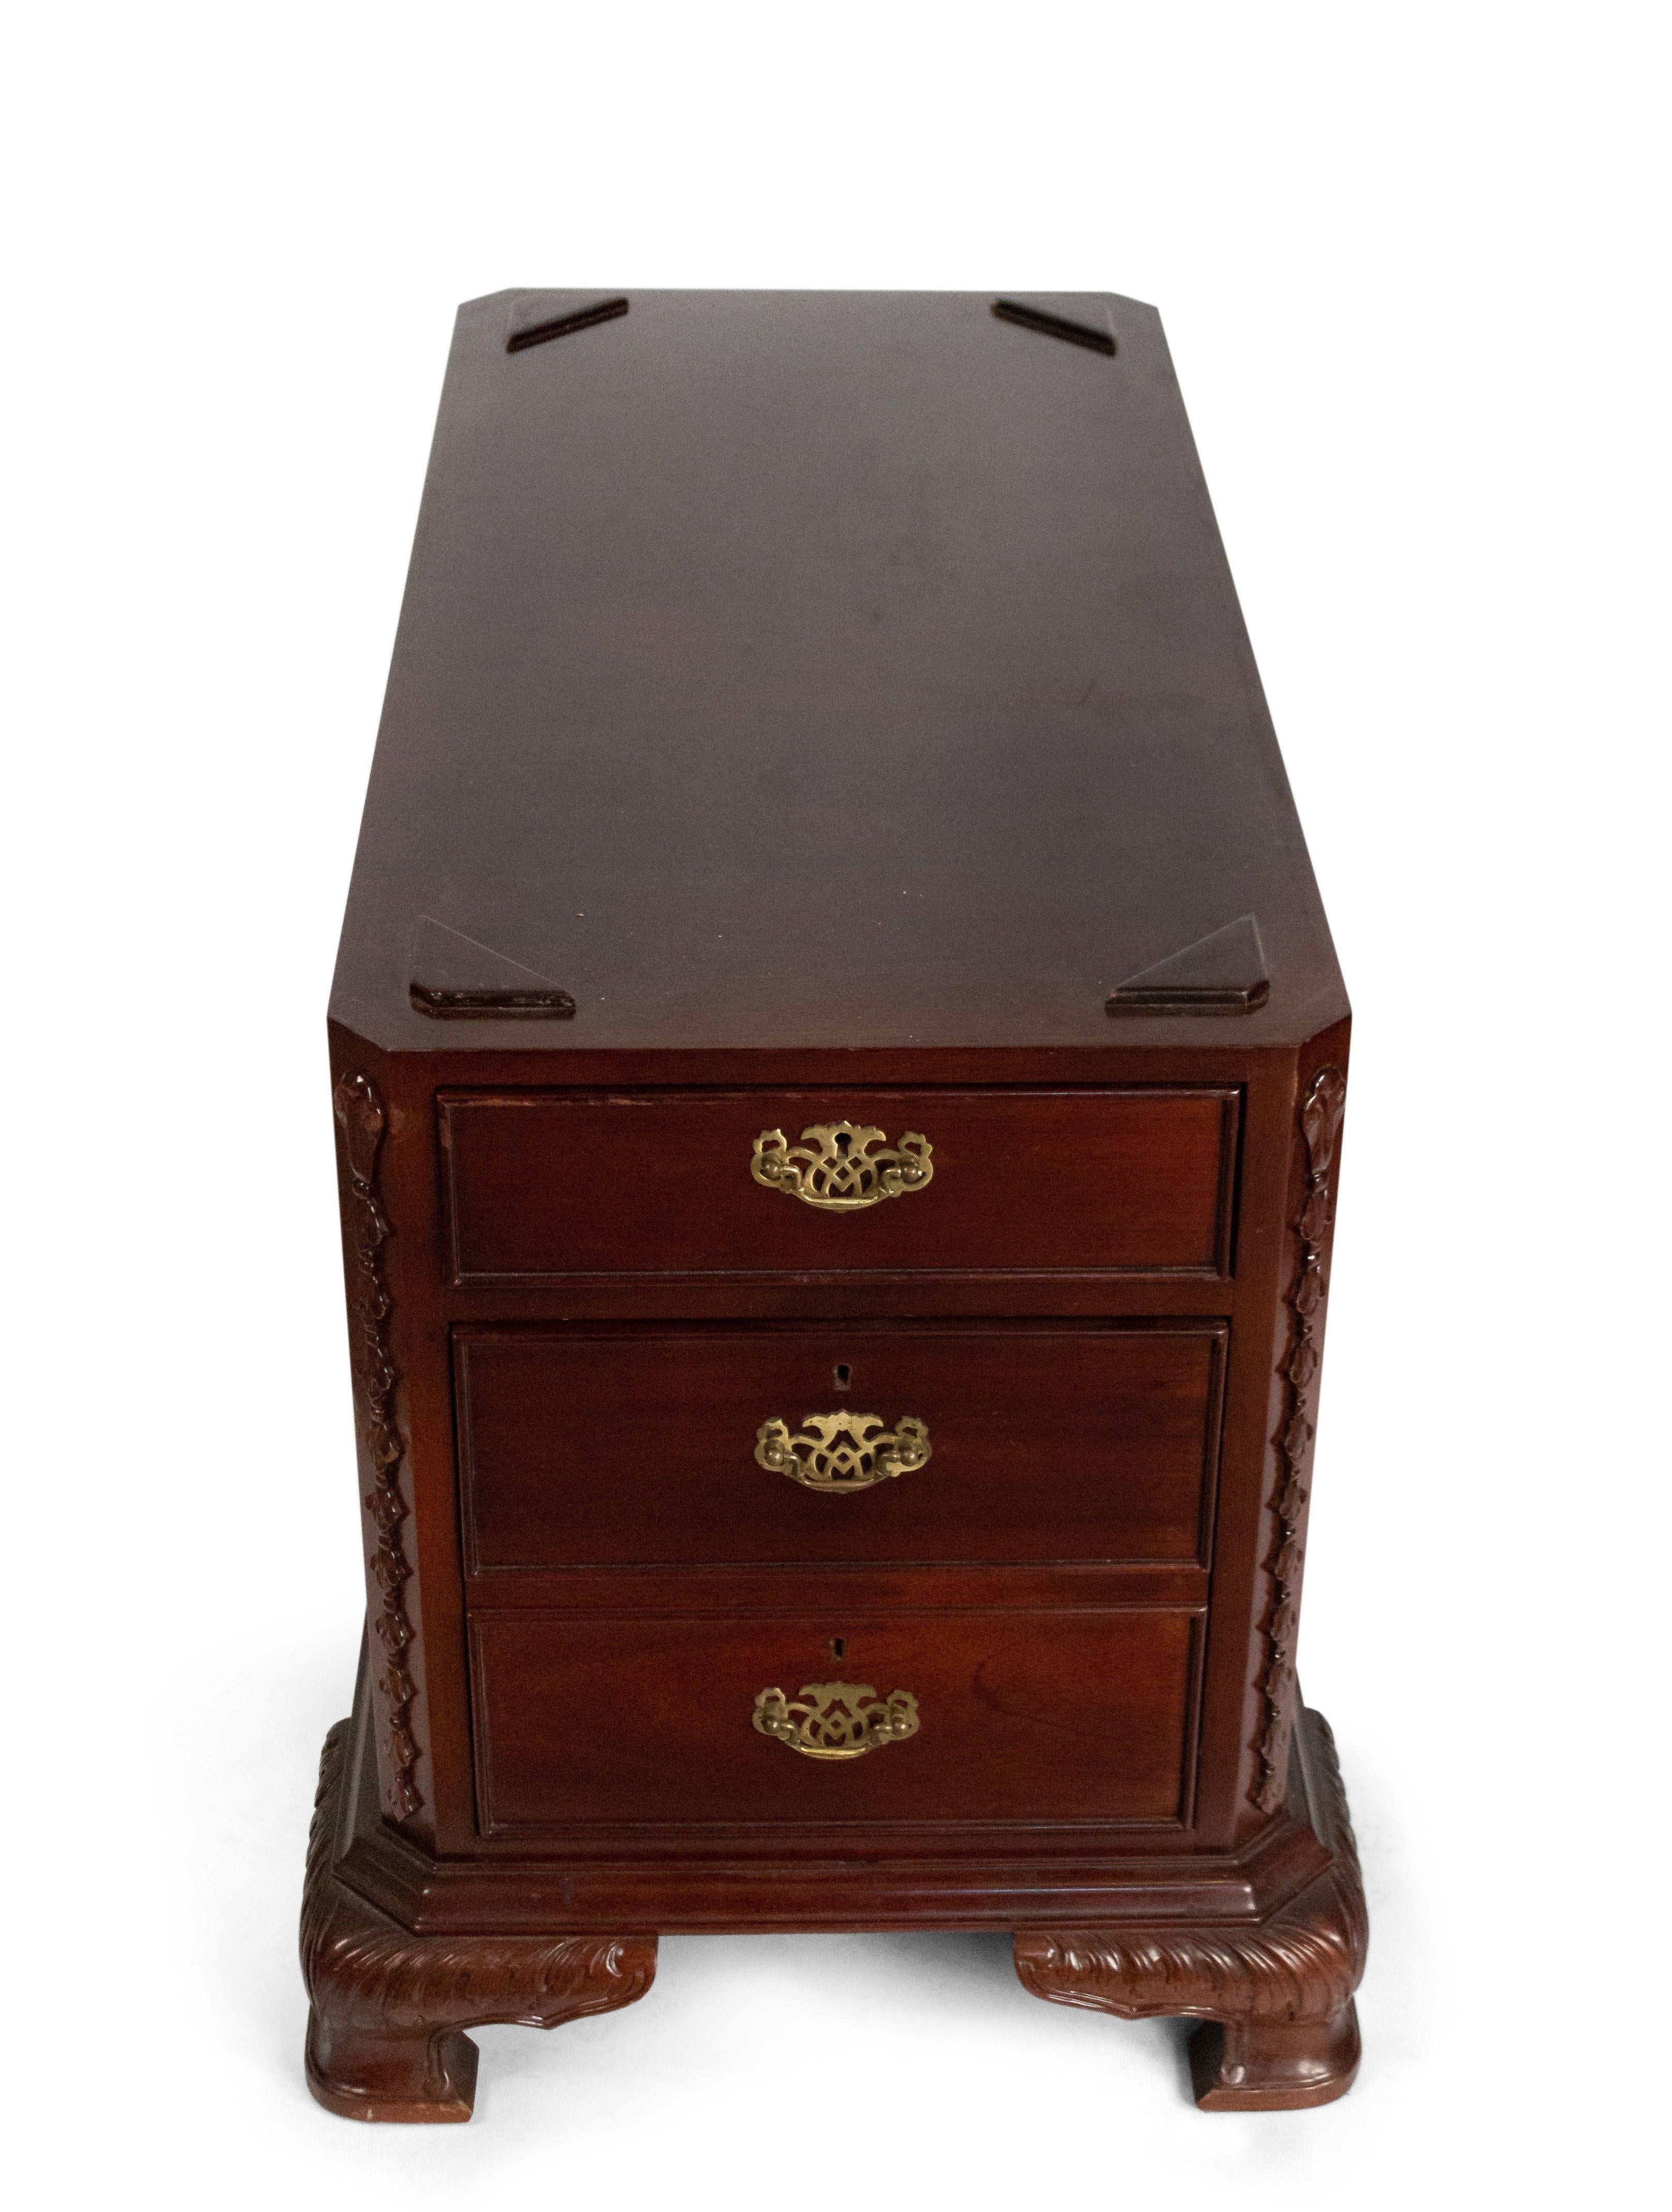 20th century English Georgian style mahogany kneehole partner's desk with 3 sections and burgundy leather top.